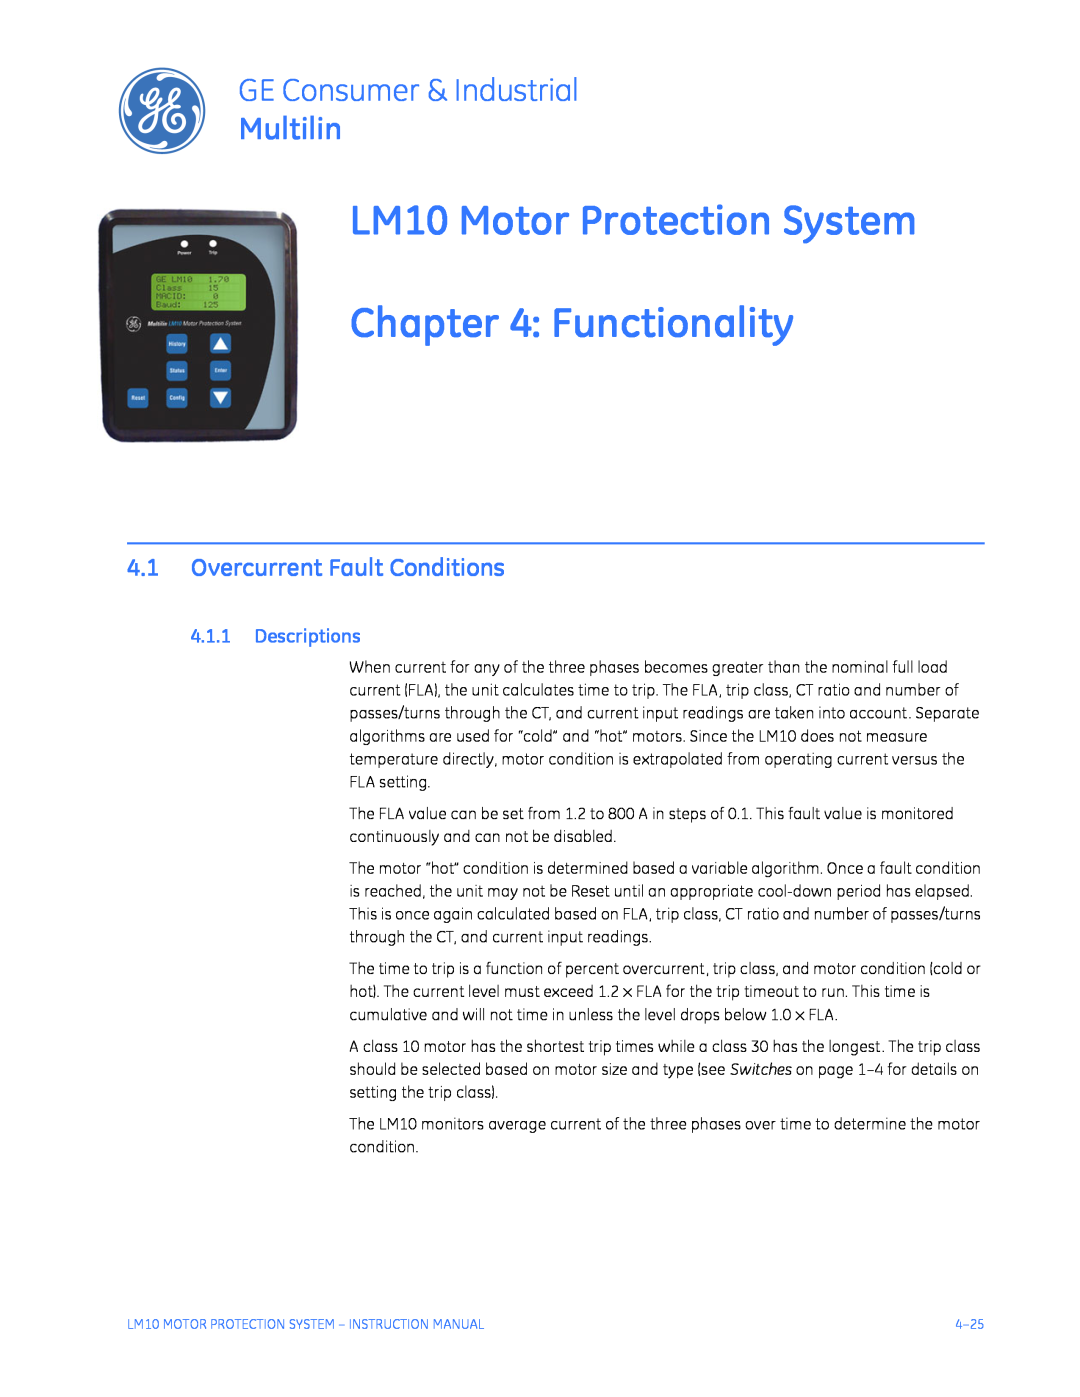 GE LM10 Motor Protection System Functionality, Overcurrent Fault Conditions, Descriptions, GE Consumer & Industrial 